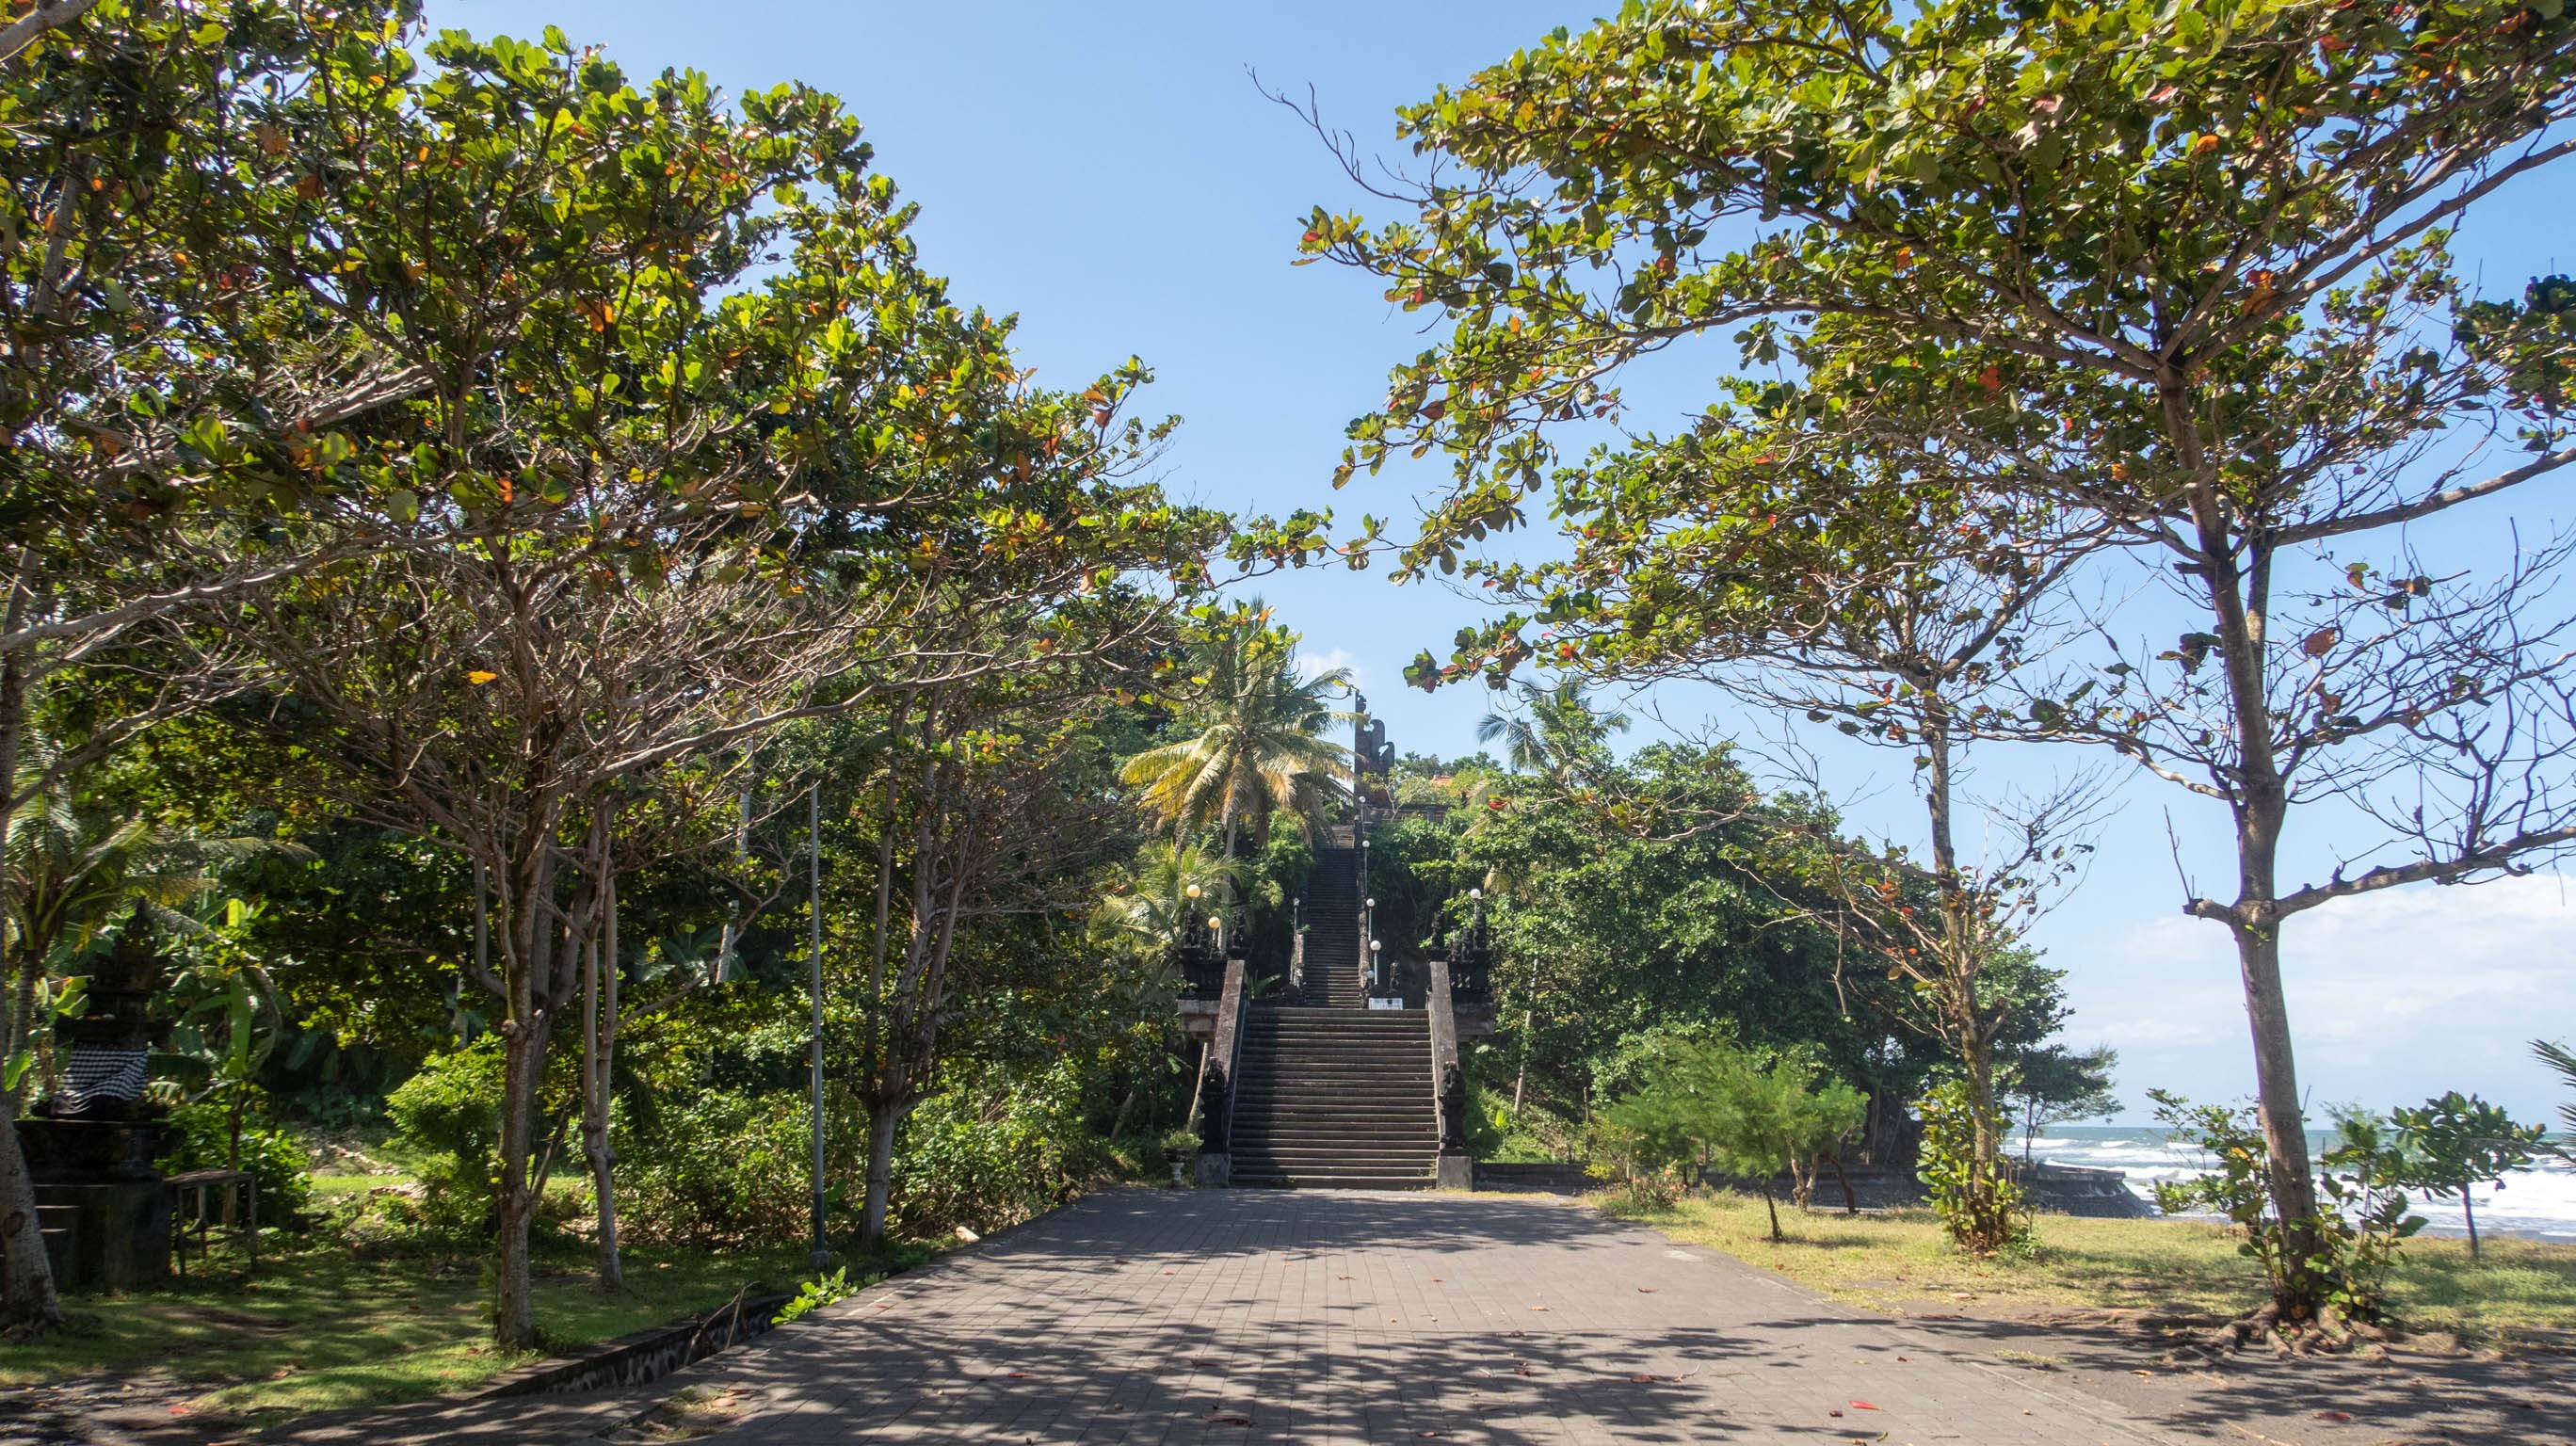 The stairs near the beach leading to the temple.